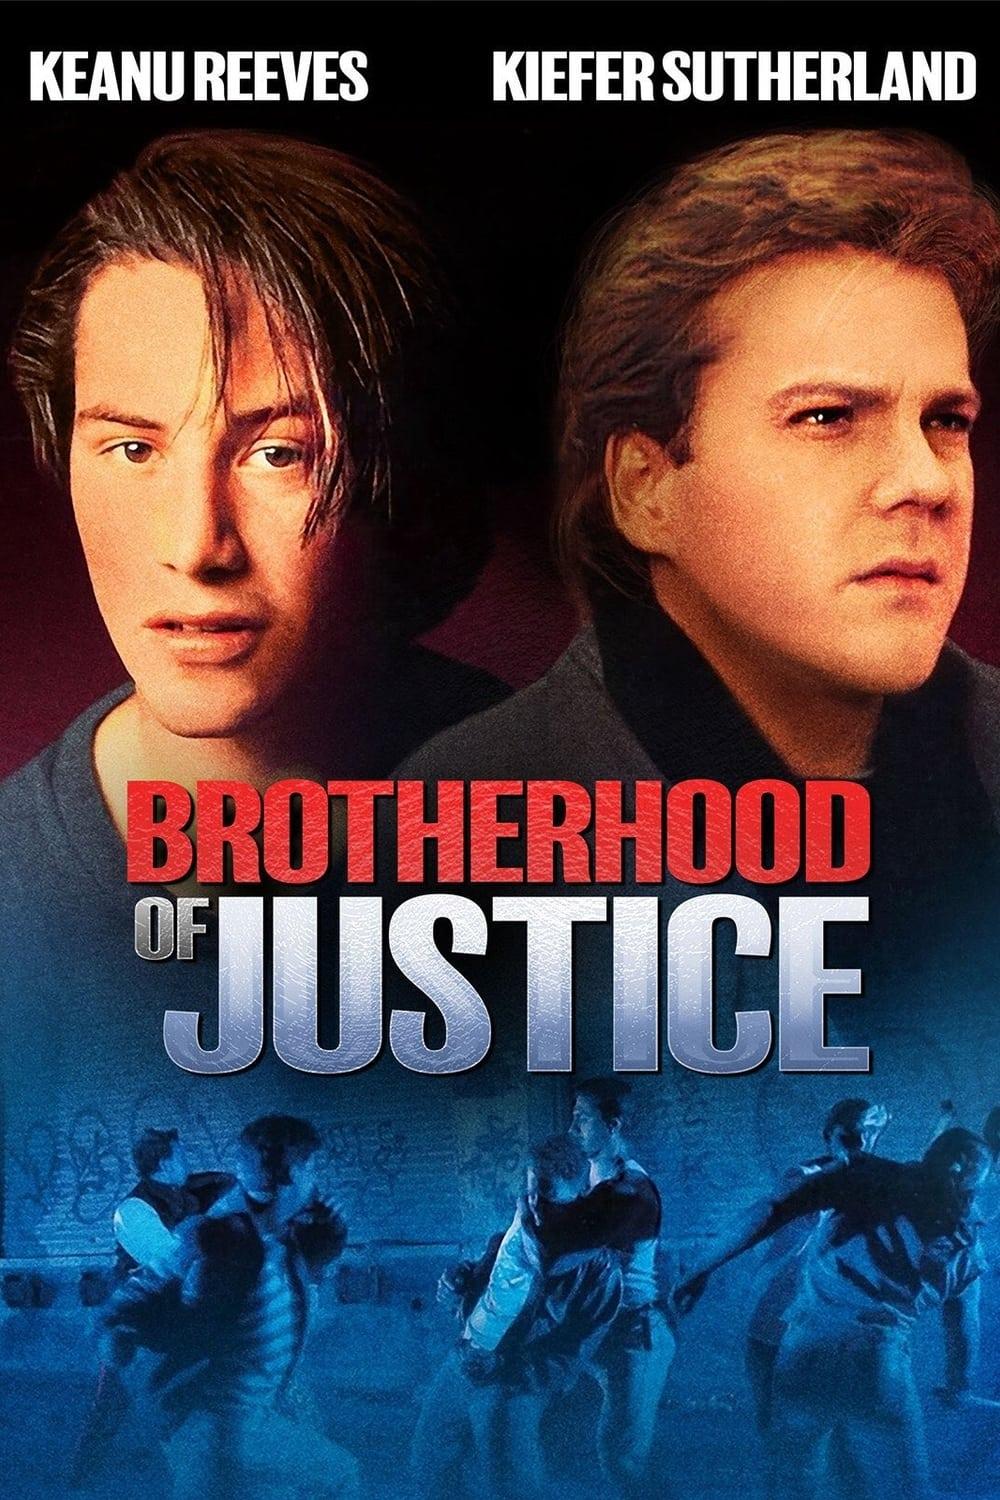 The Brotherhood of Justice poster